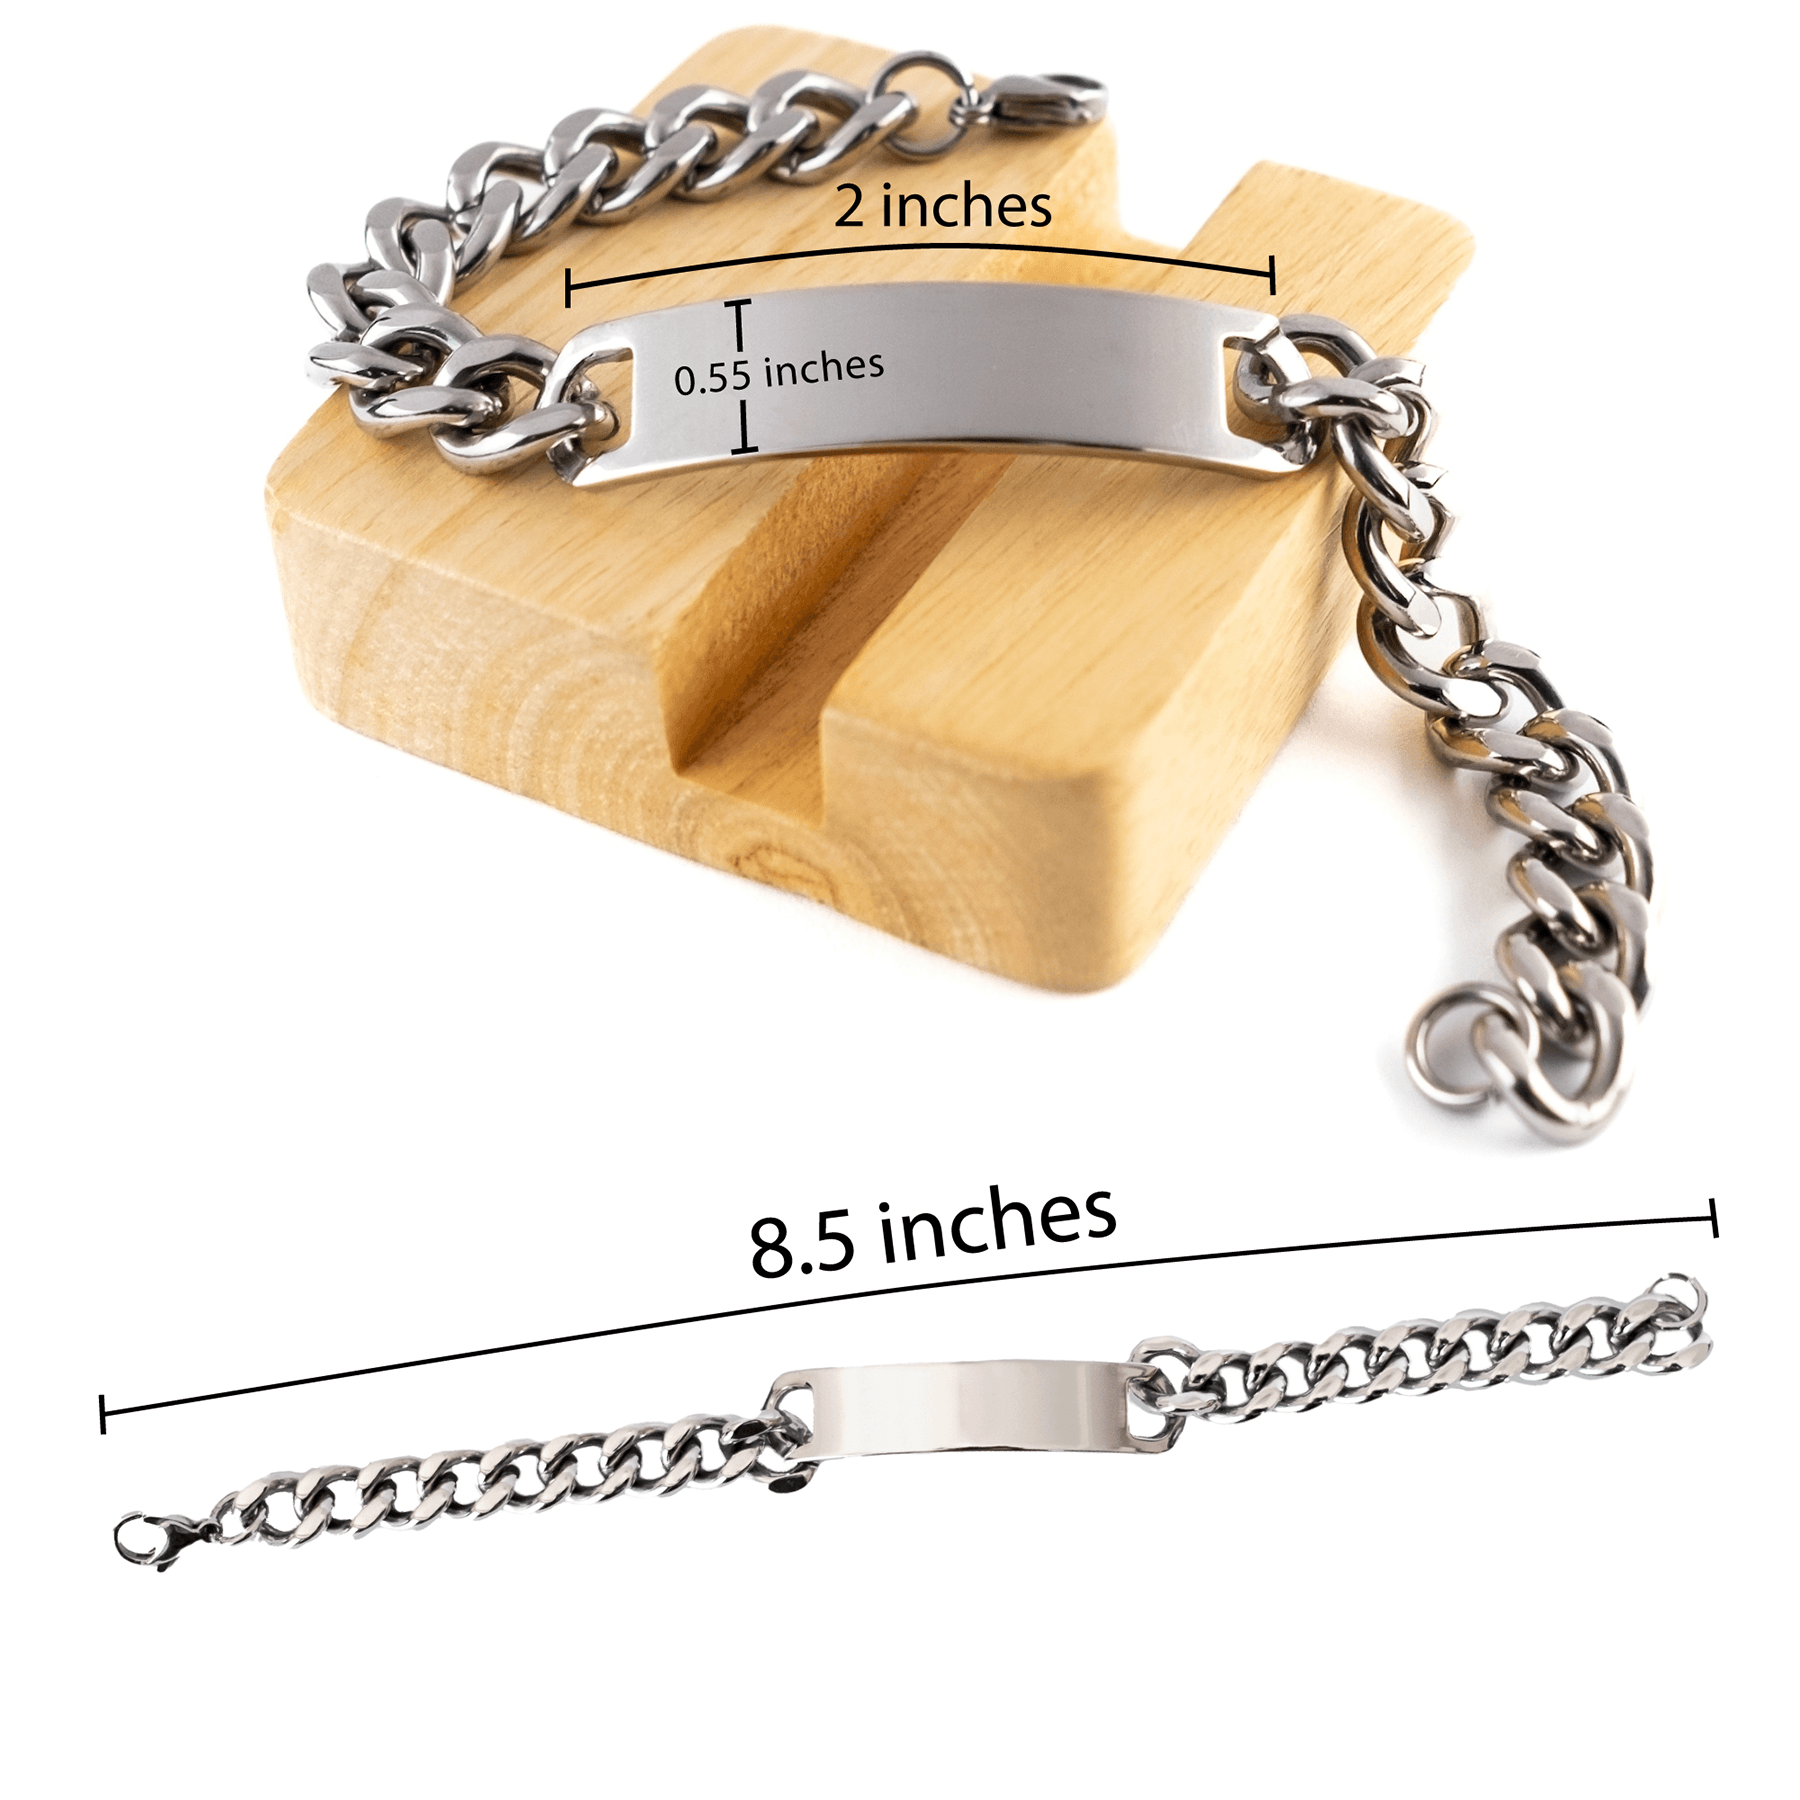 Mechanical Engineer Cuban Chain Link Engraved Bracelet - Thanks for being who you are - Birthday Christmas Jewelry Gifts Coworkers Colleague Boss - Mallard Moon Gift Shop